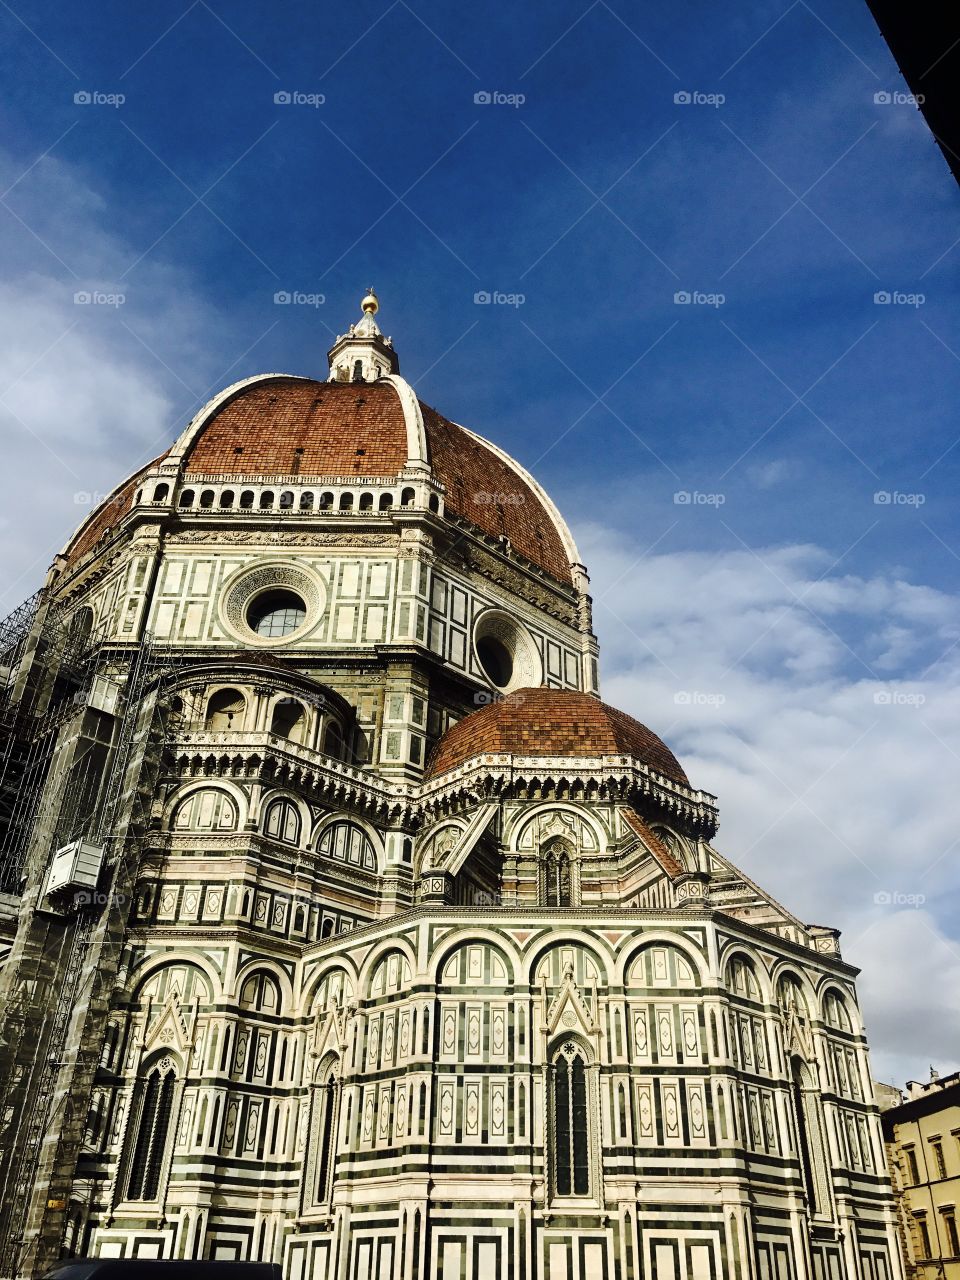 Il Duomo:  Florence, Italy